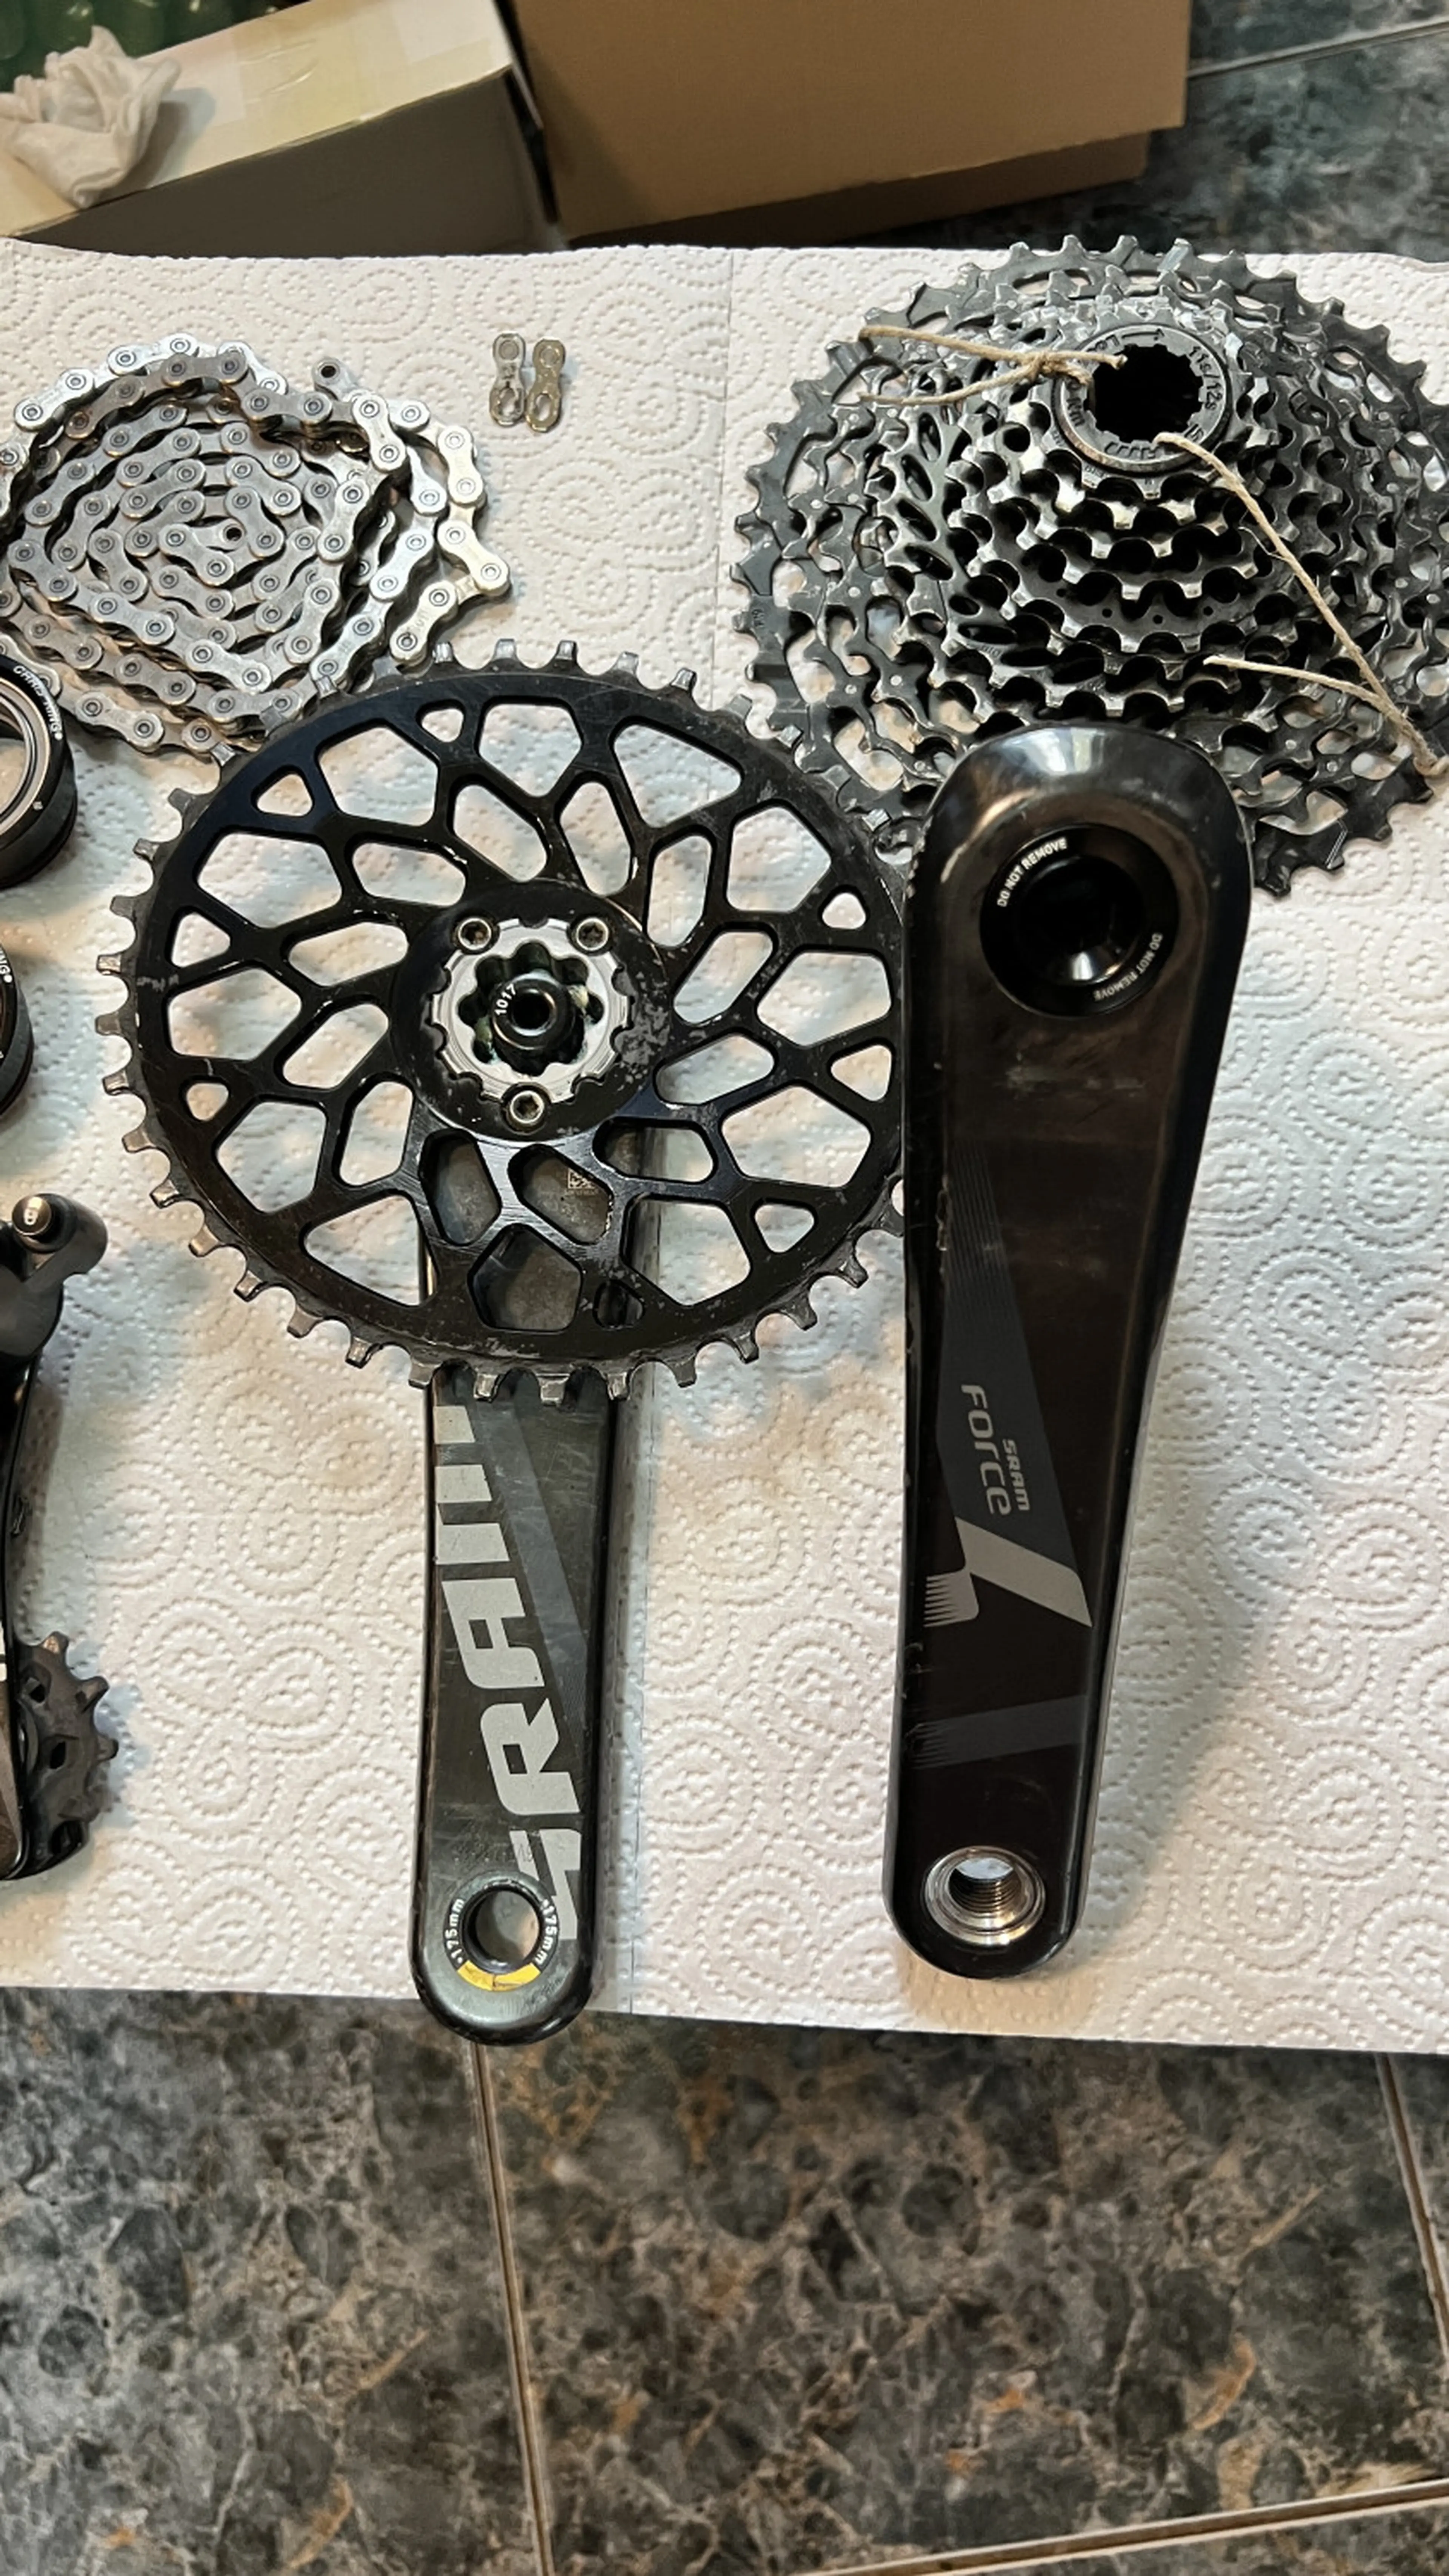 6. Groupset complet Sram Force CX1 1x11